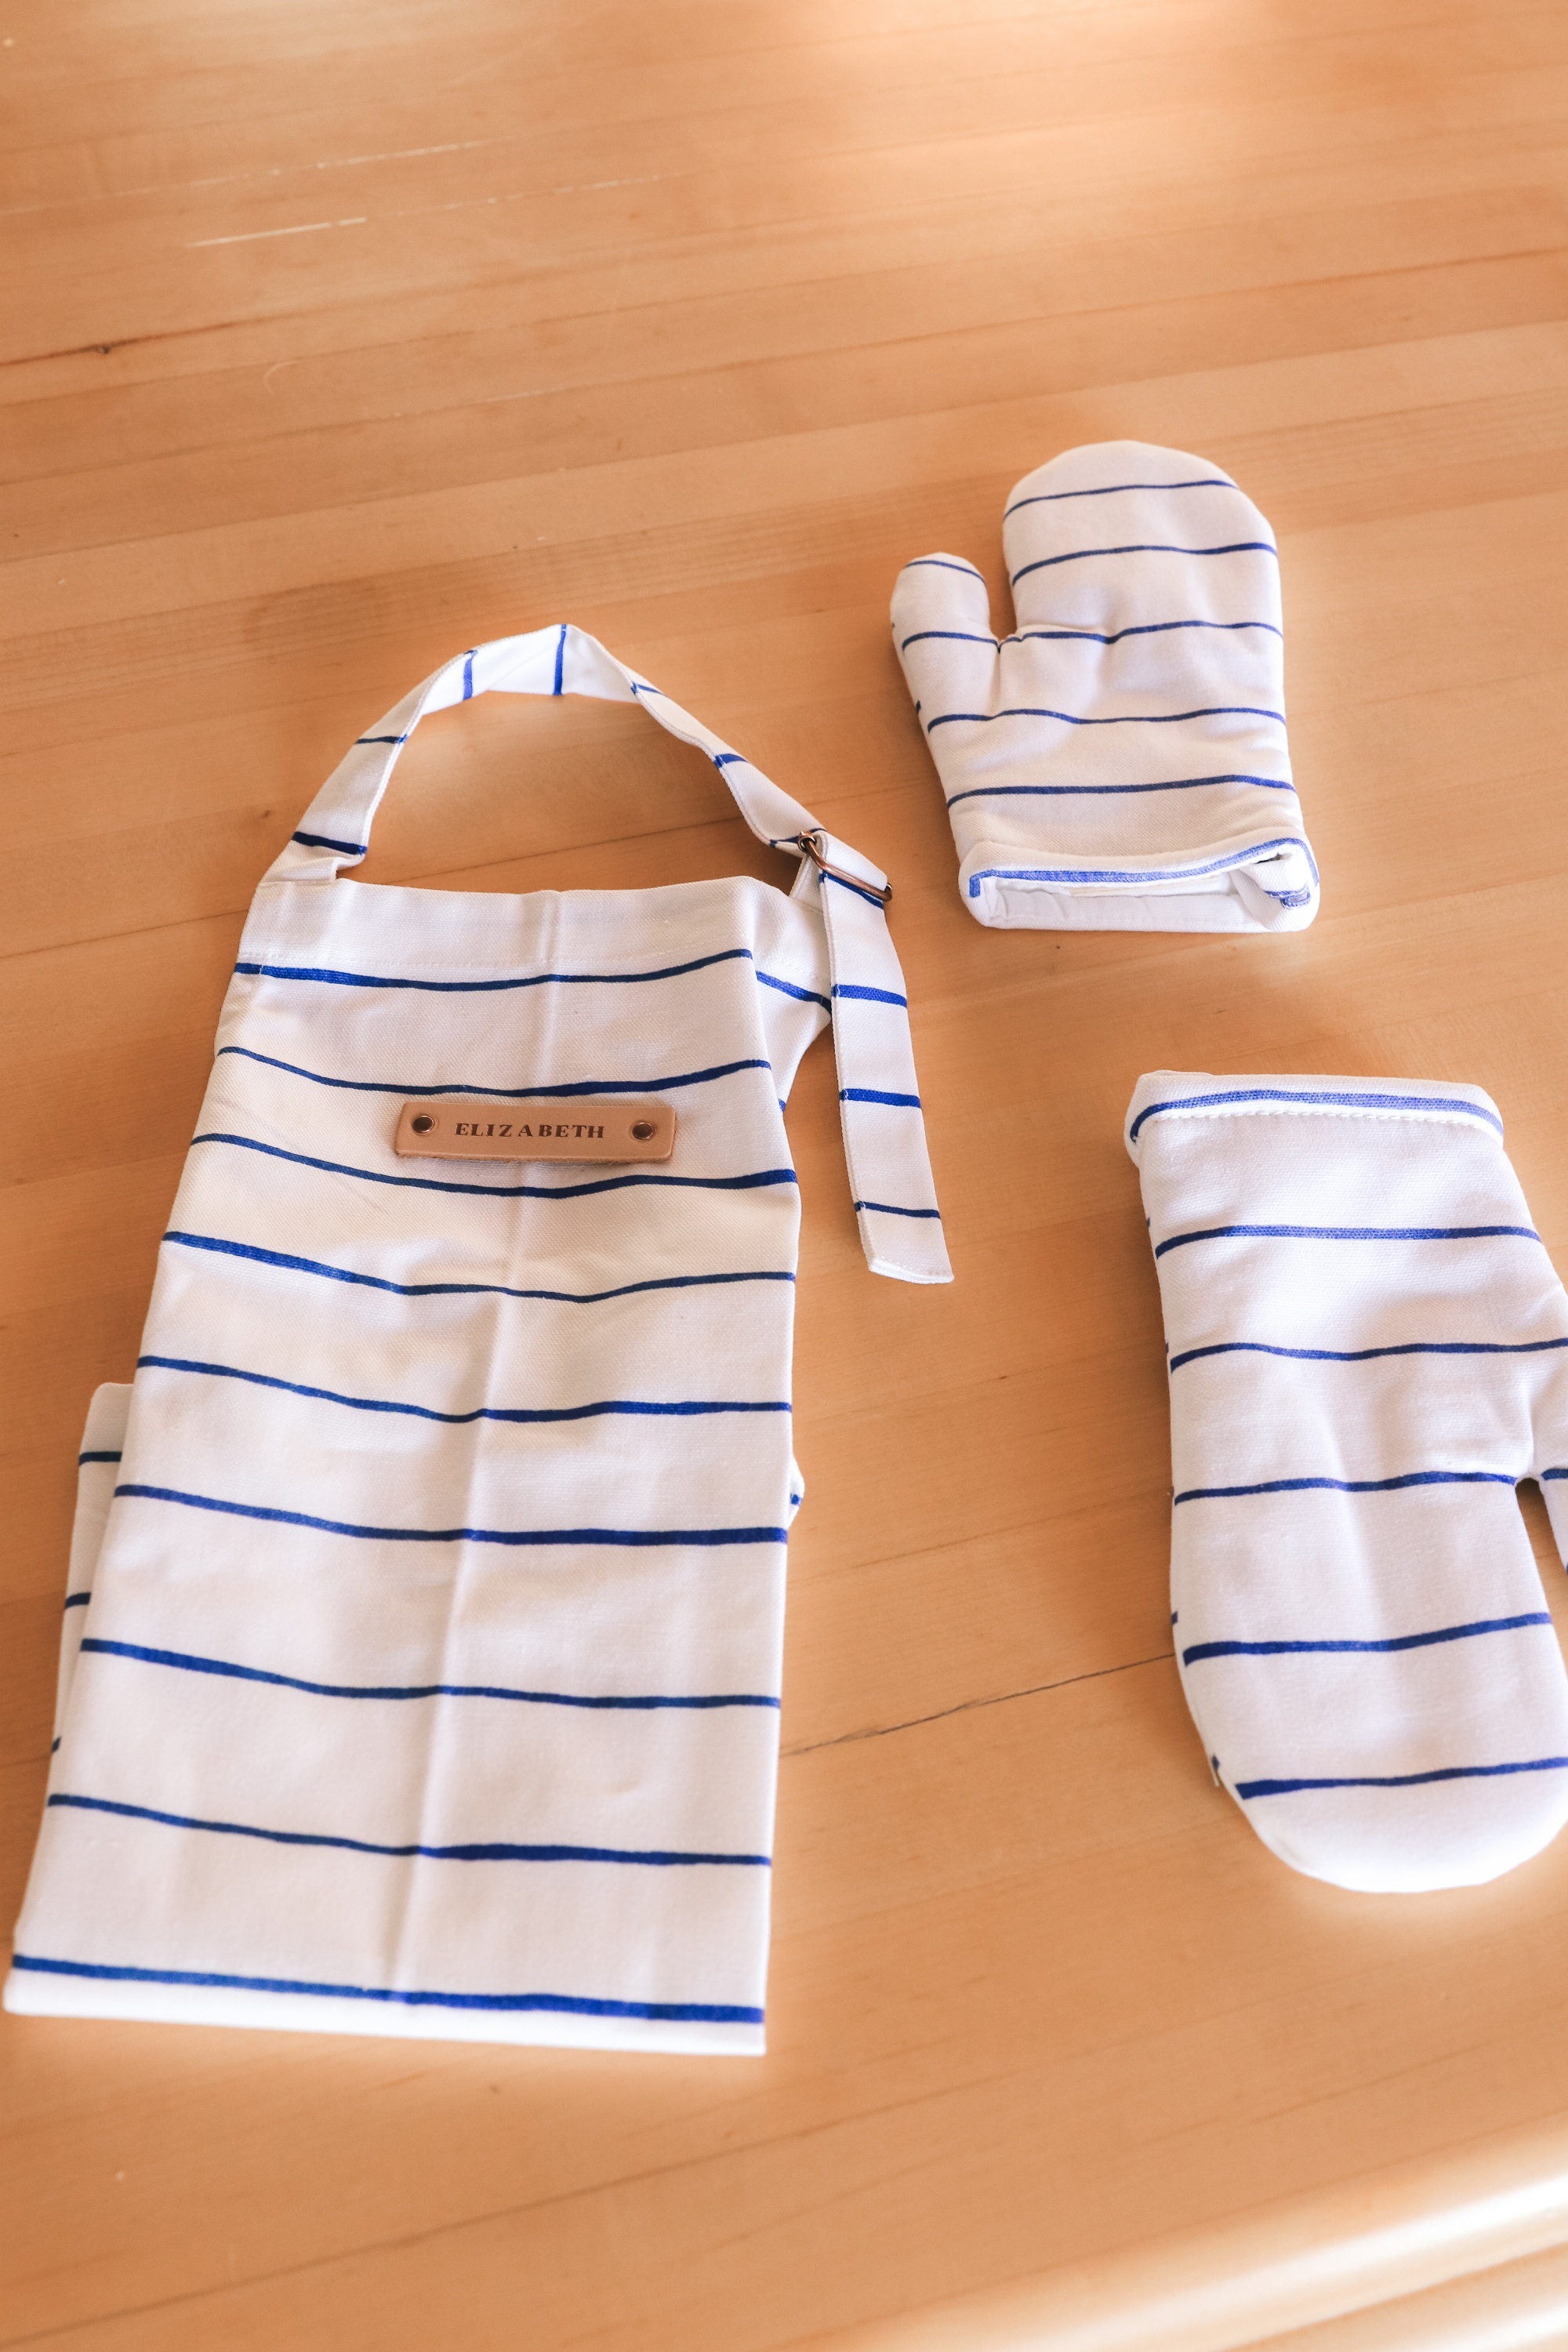 Personalized Gifts, Erin Busbee of Busbee Style sharing a blue and white striped apron with "Elizabeth" on it for her daughter and matching blue and white striped oven mitts from Minted for her daughter in Telluride, Colorado